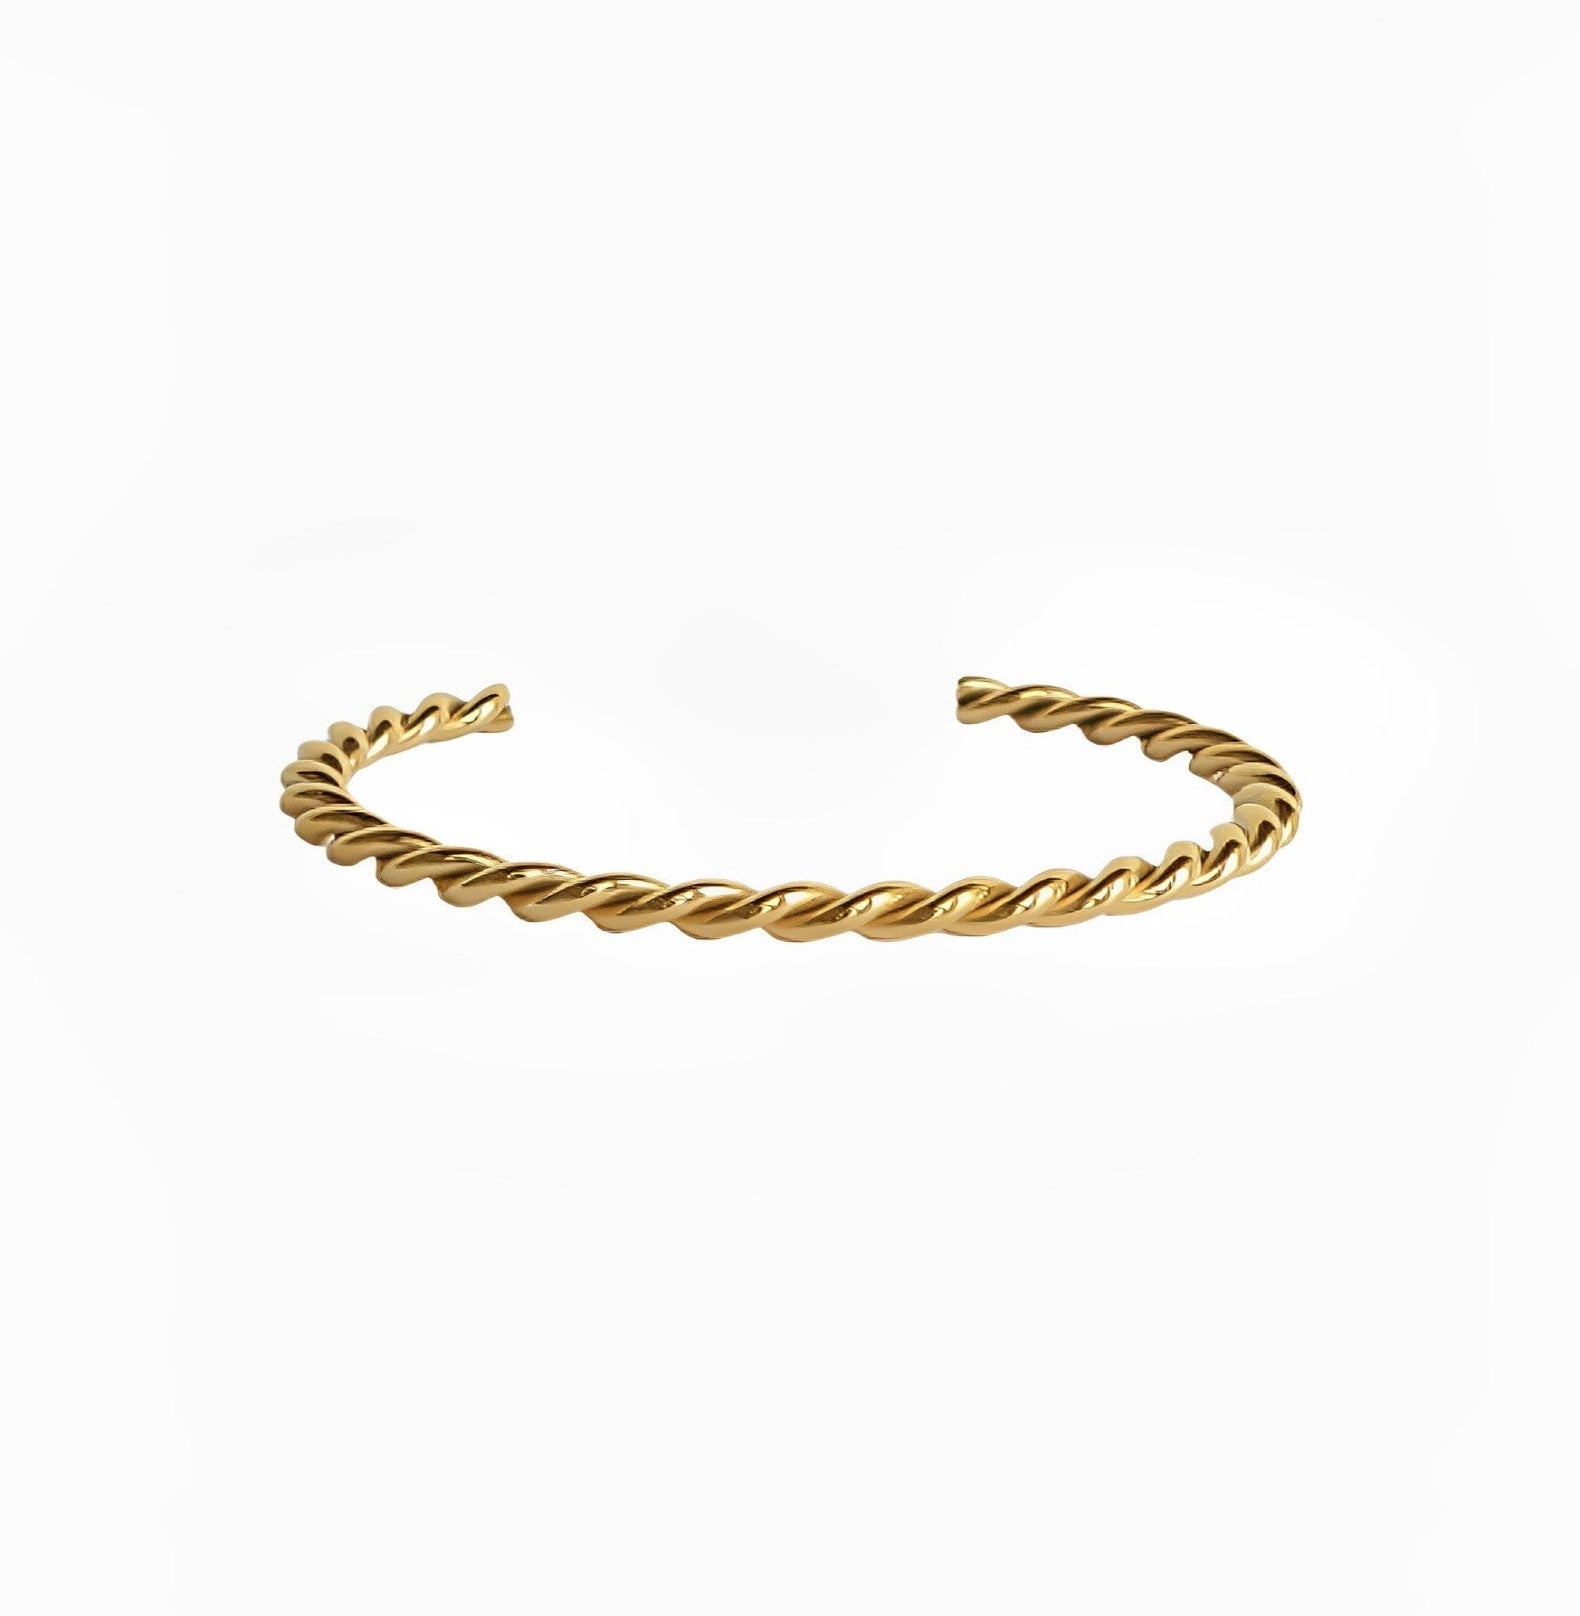 NIKO BRACELET braclet Yubama Jewelry Online Store - The Elegant Designs of Gold and Silver ! 